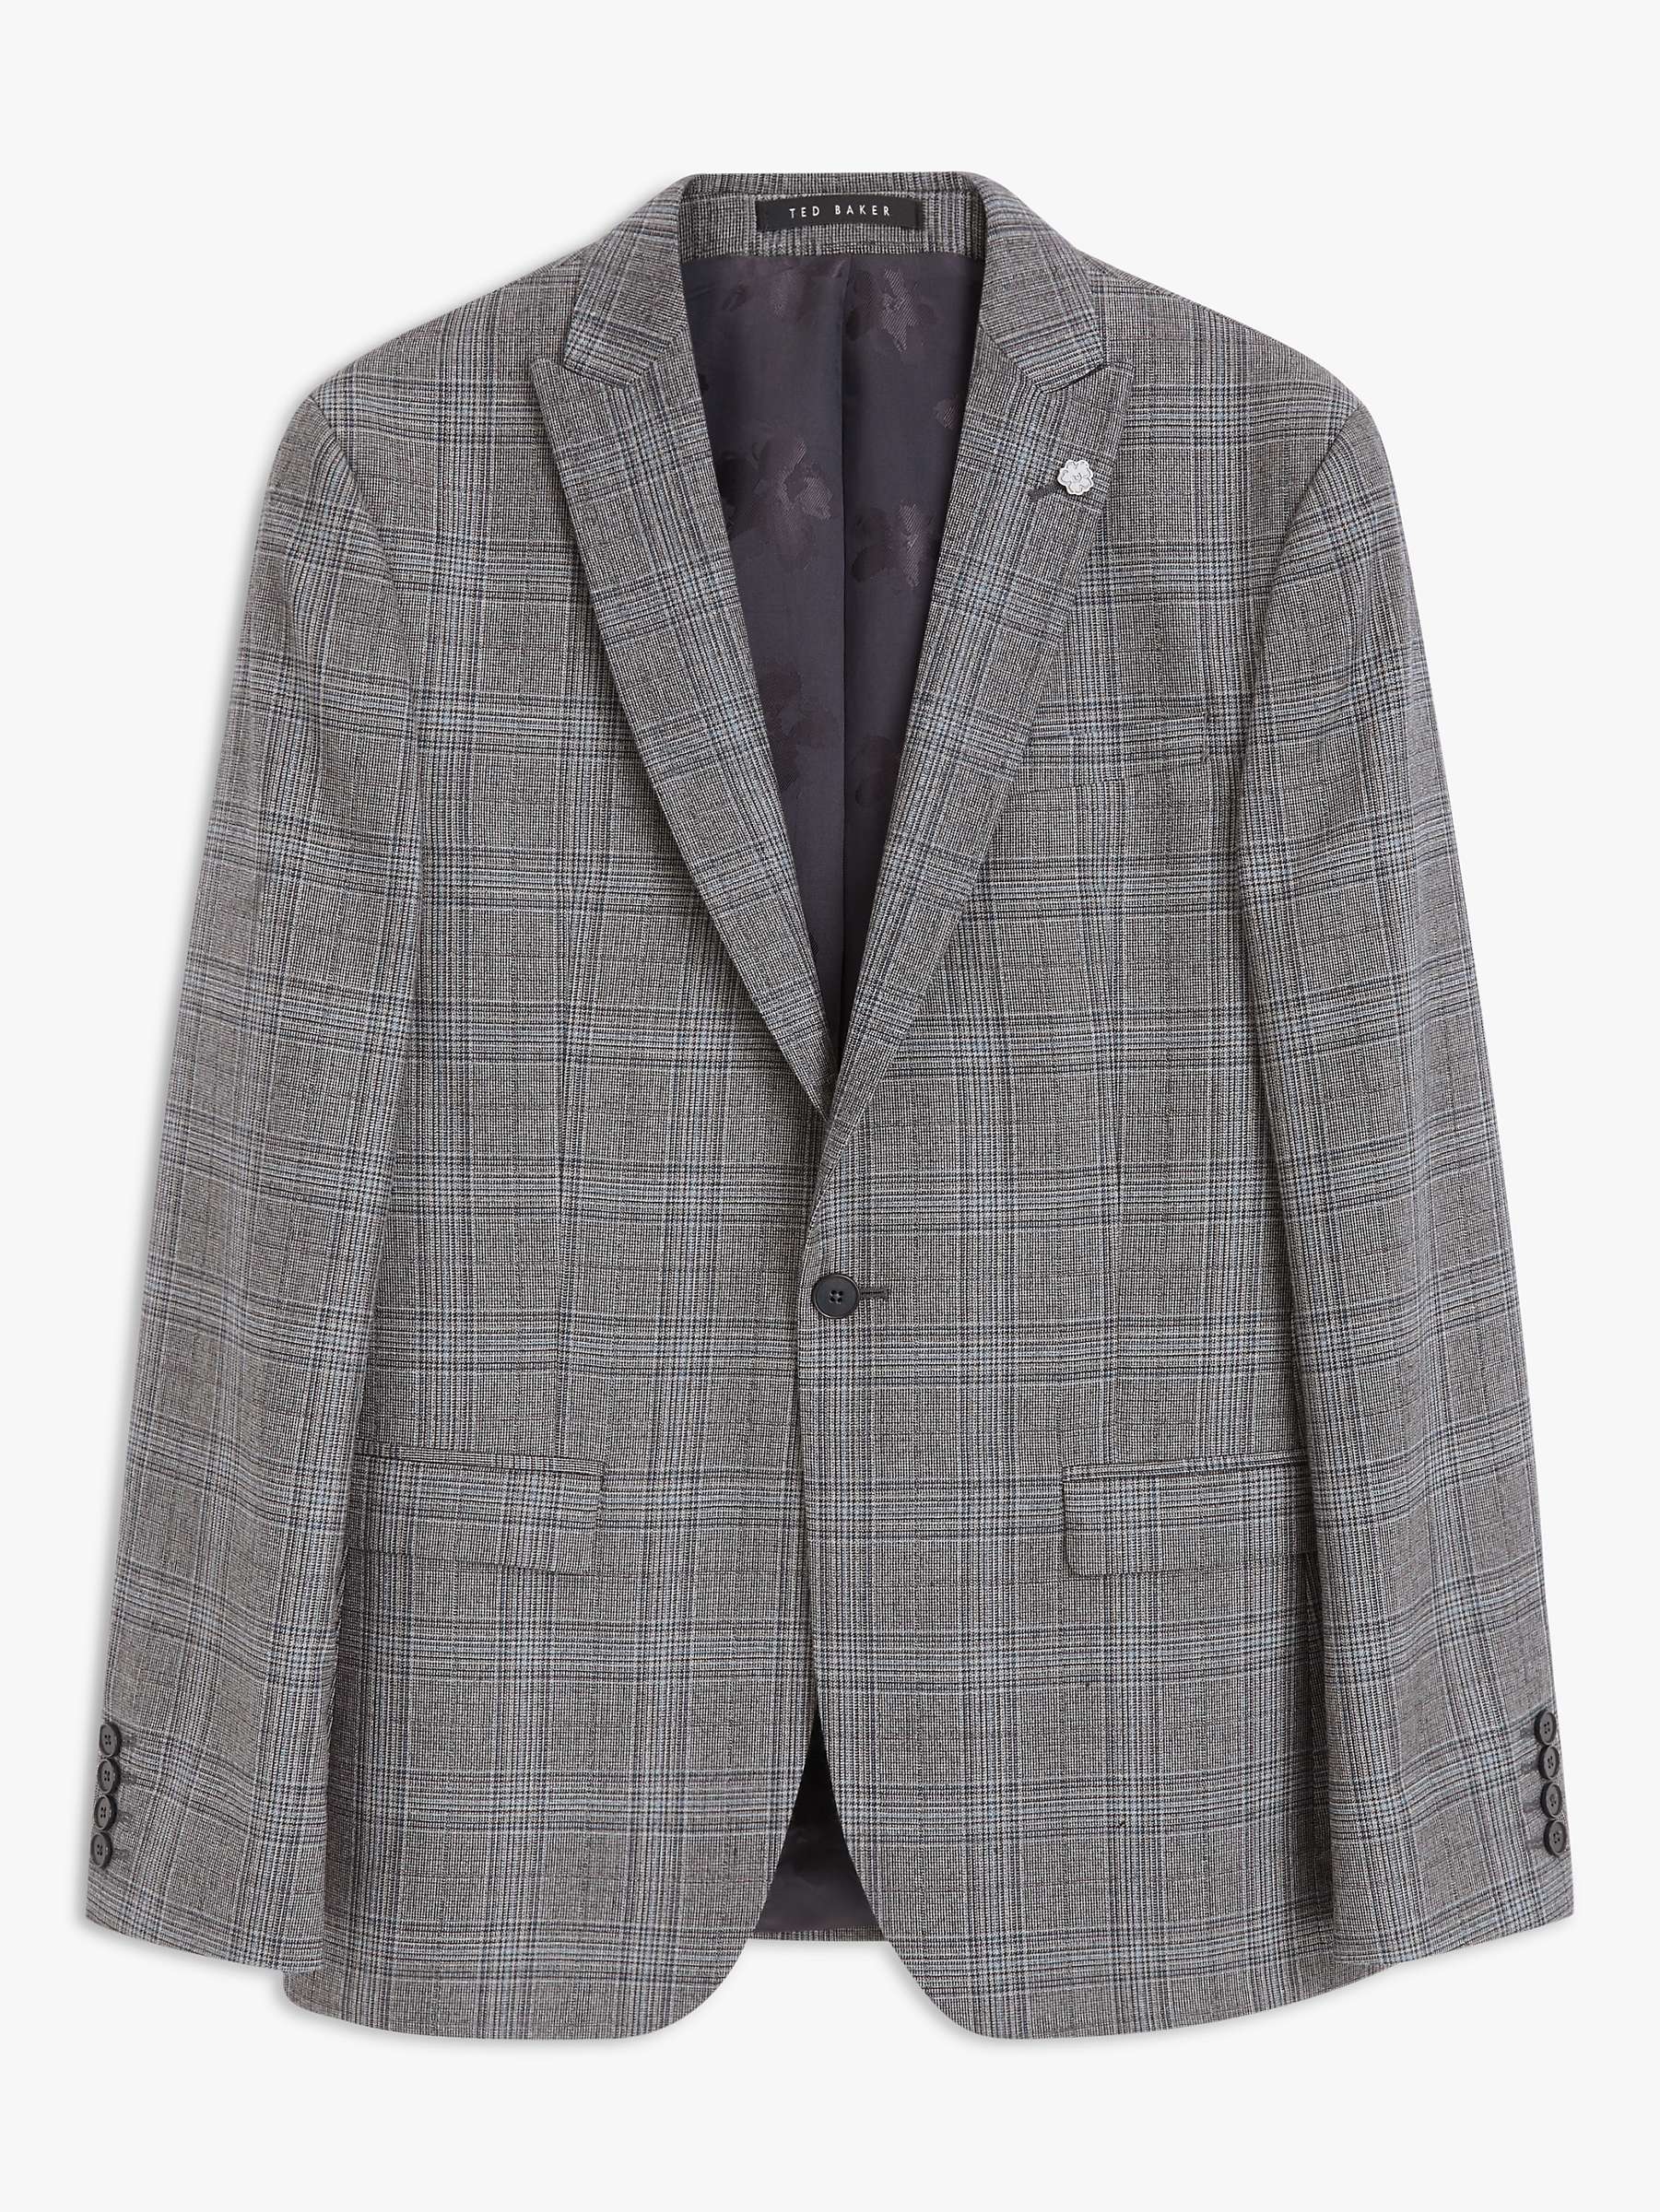 Ted Baker Prince Of Wales Check Suit Jacket, Blue at John Lewis & Partners